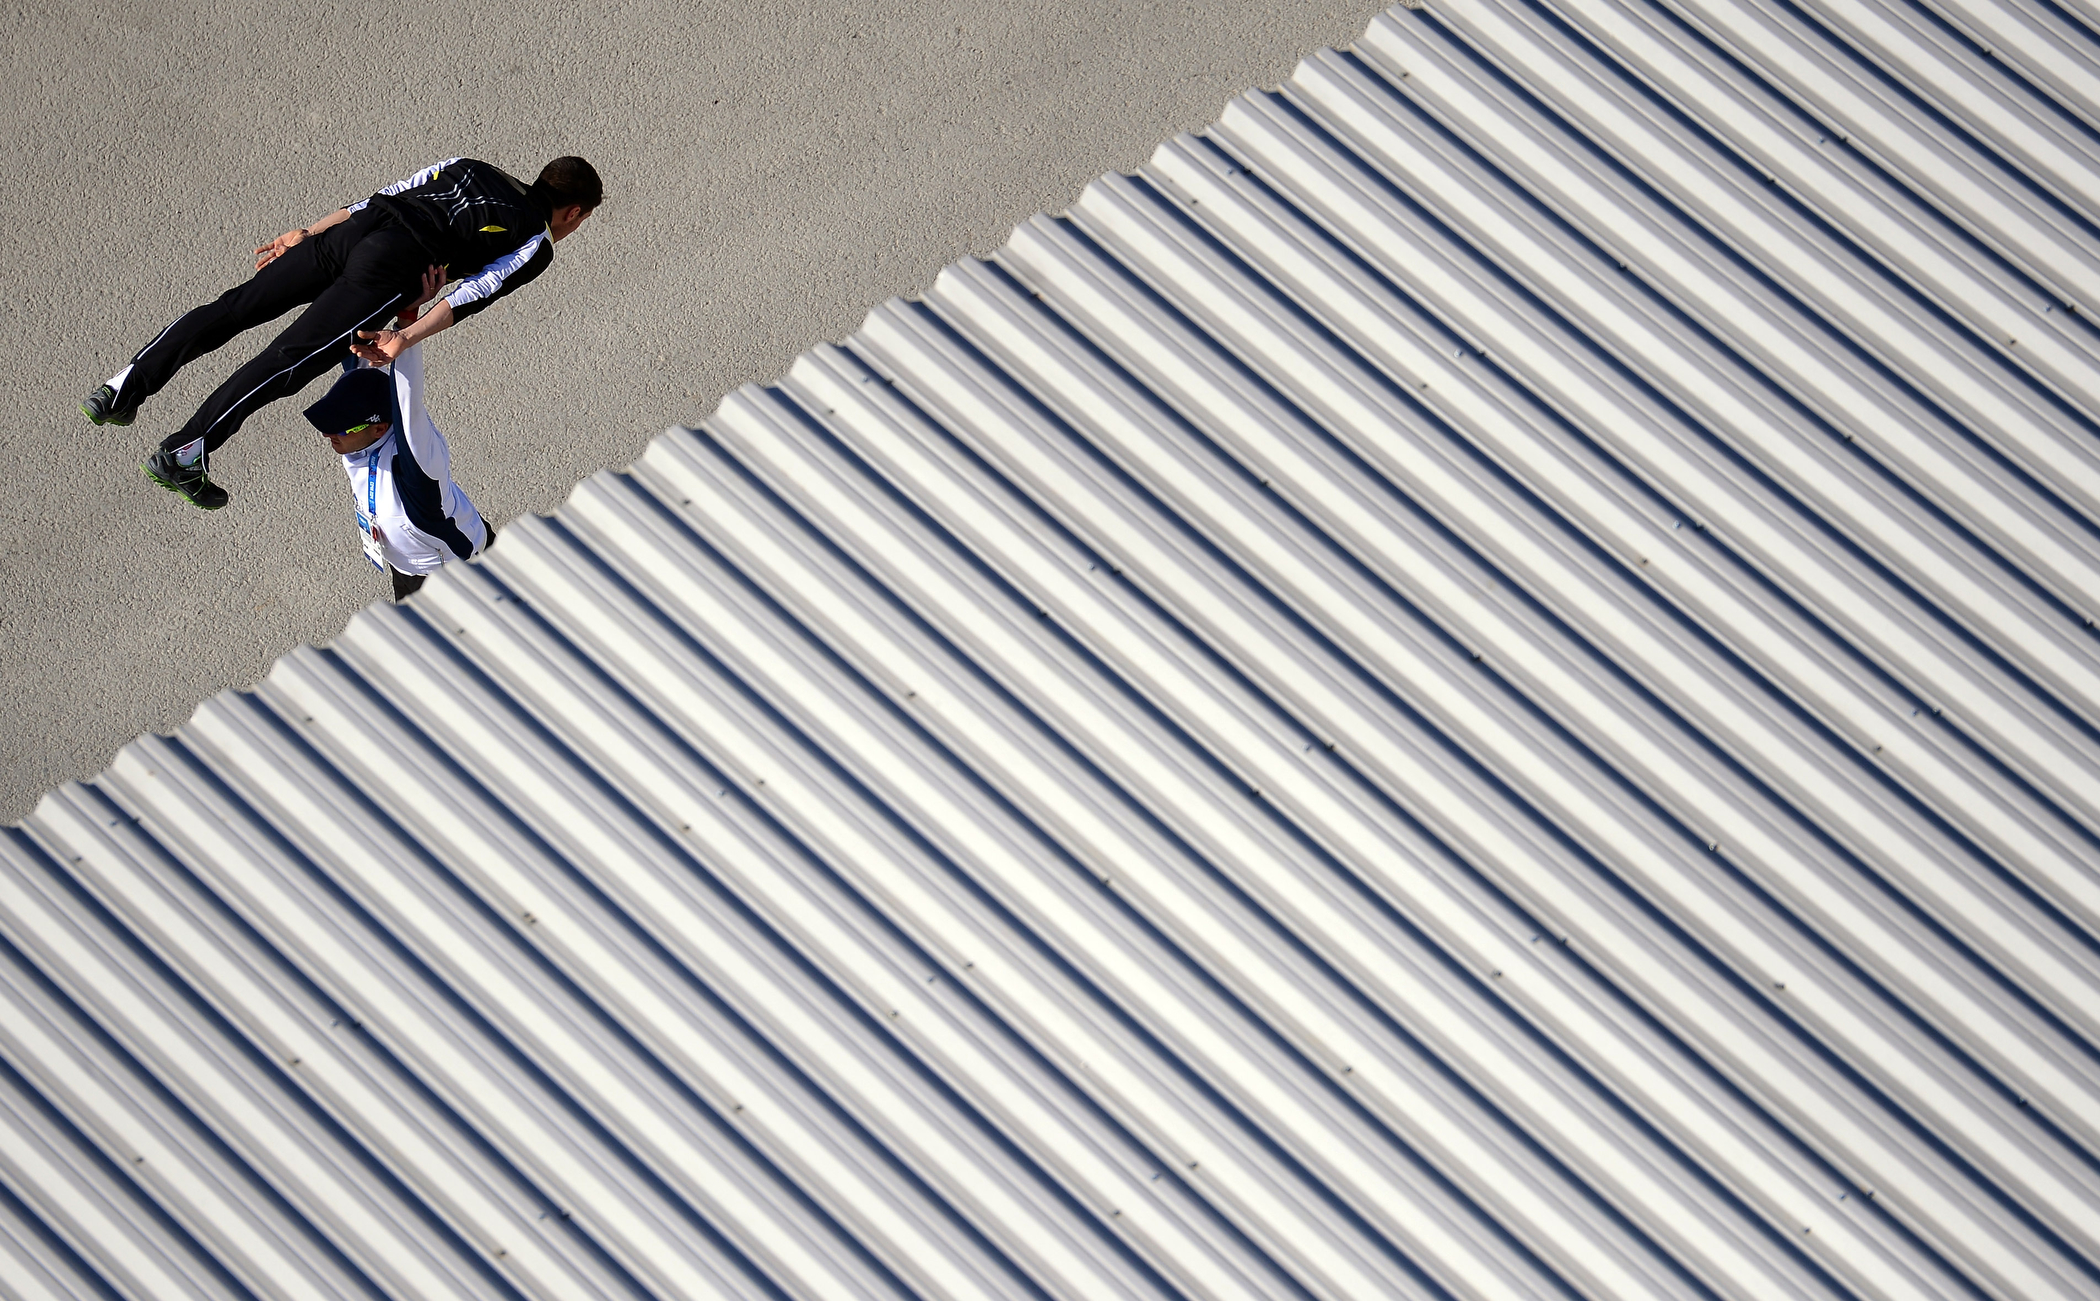 An athlete warm up with his coach prior to the Men's Individual Gundersen Large Hill/10 km Nordic Combined training on day 8 of the Sochi 2014 Winter Olympics at the RusSki Gorki Ski Jumping Center on Feb. 15, 2014 in Sochi, Russia.